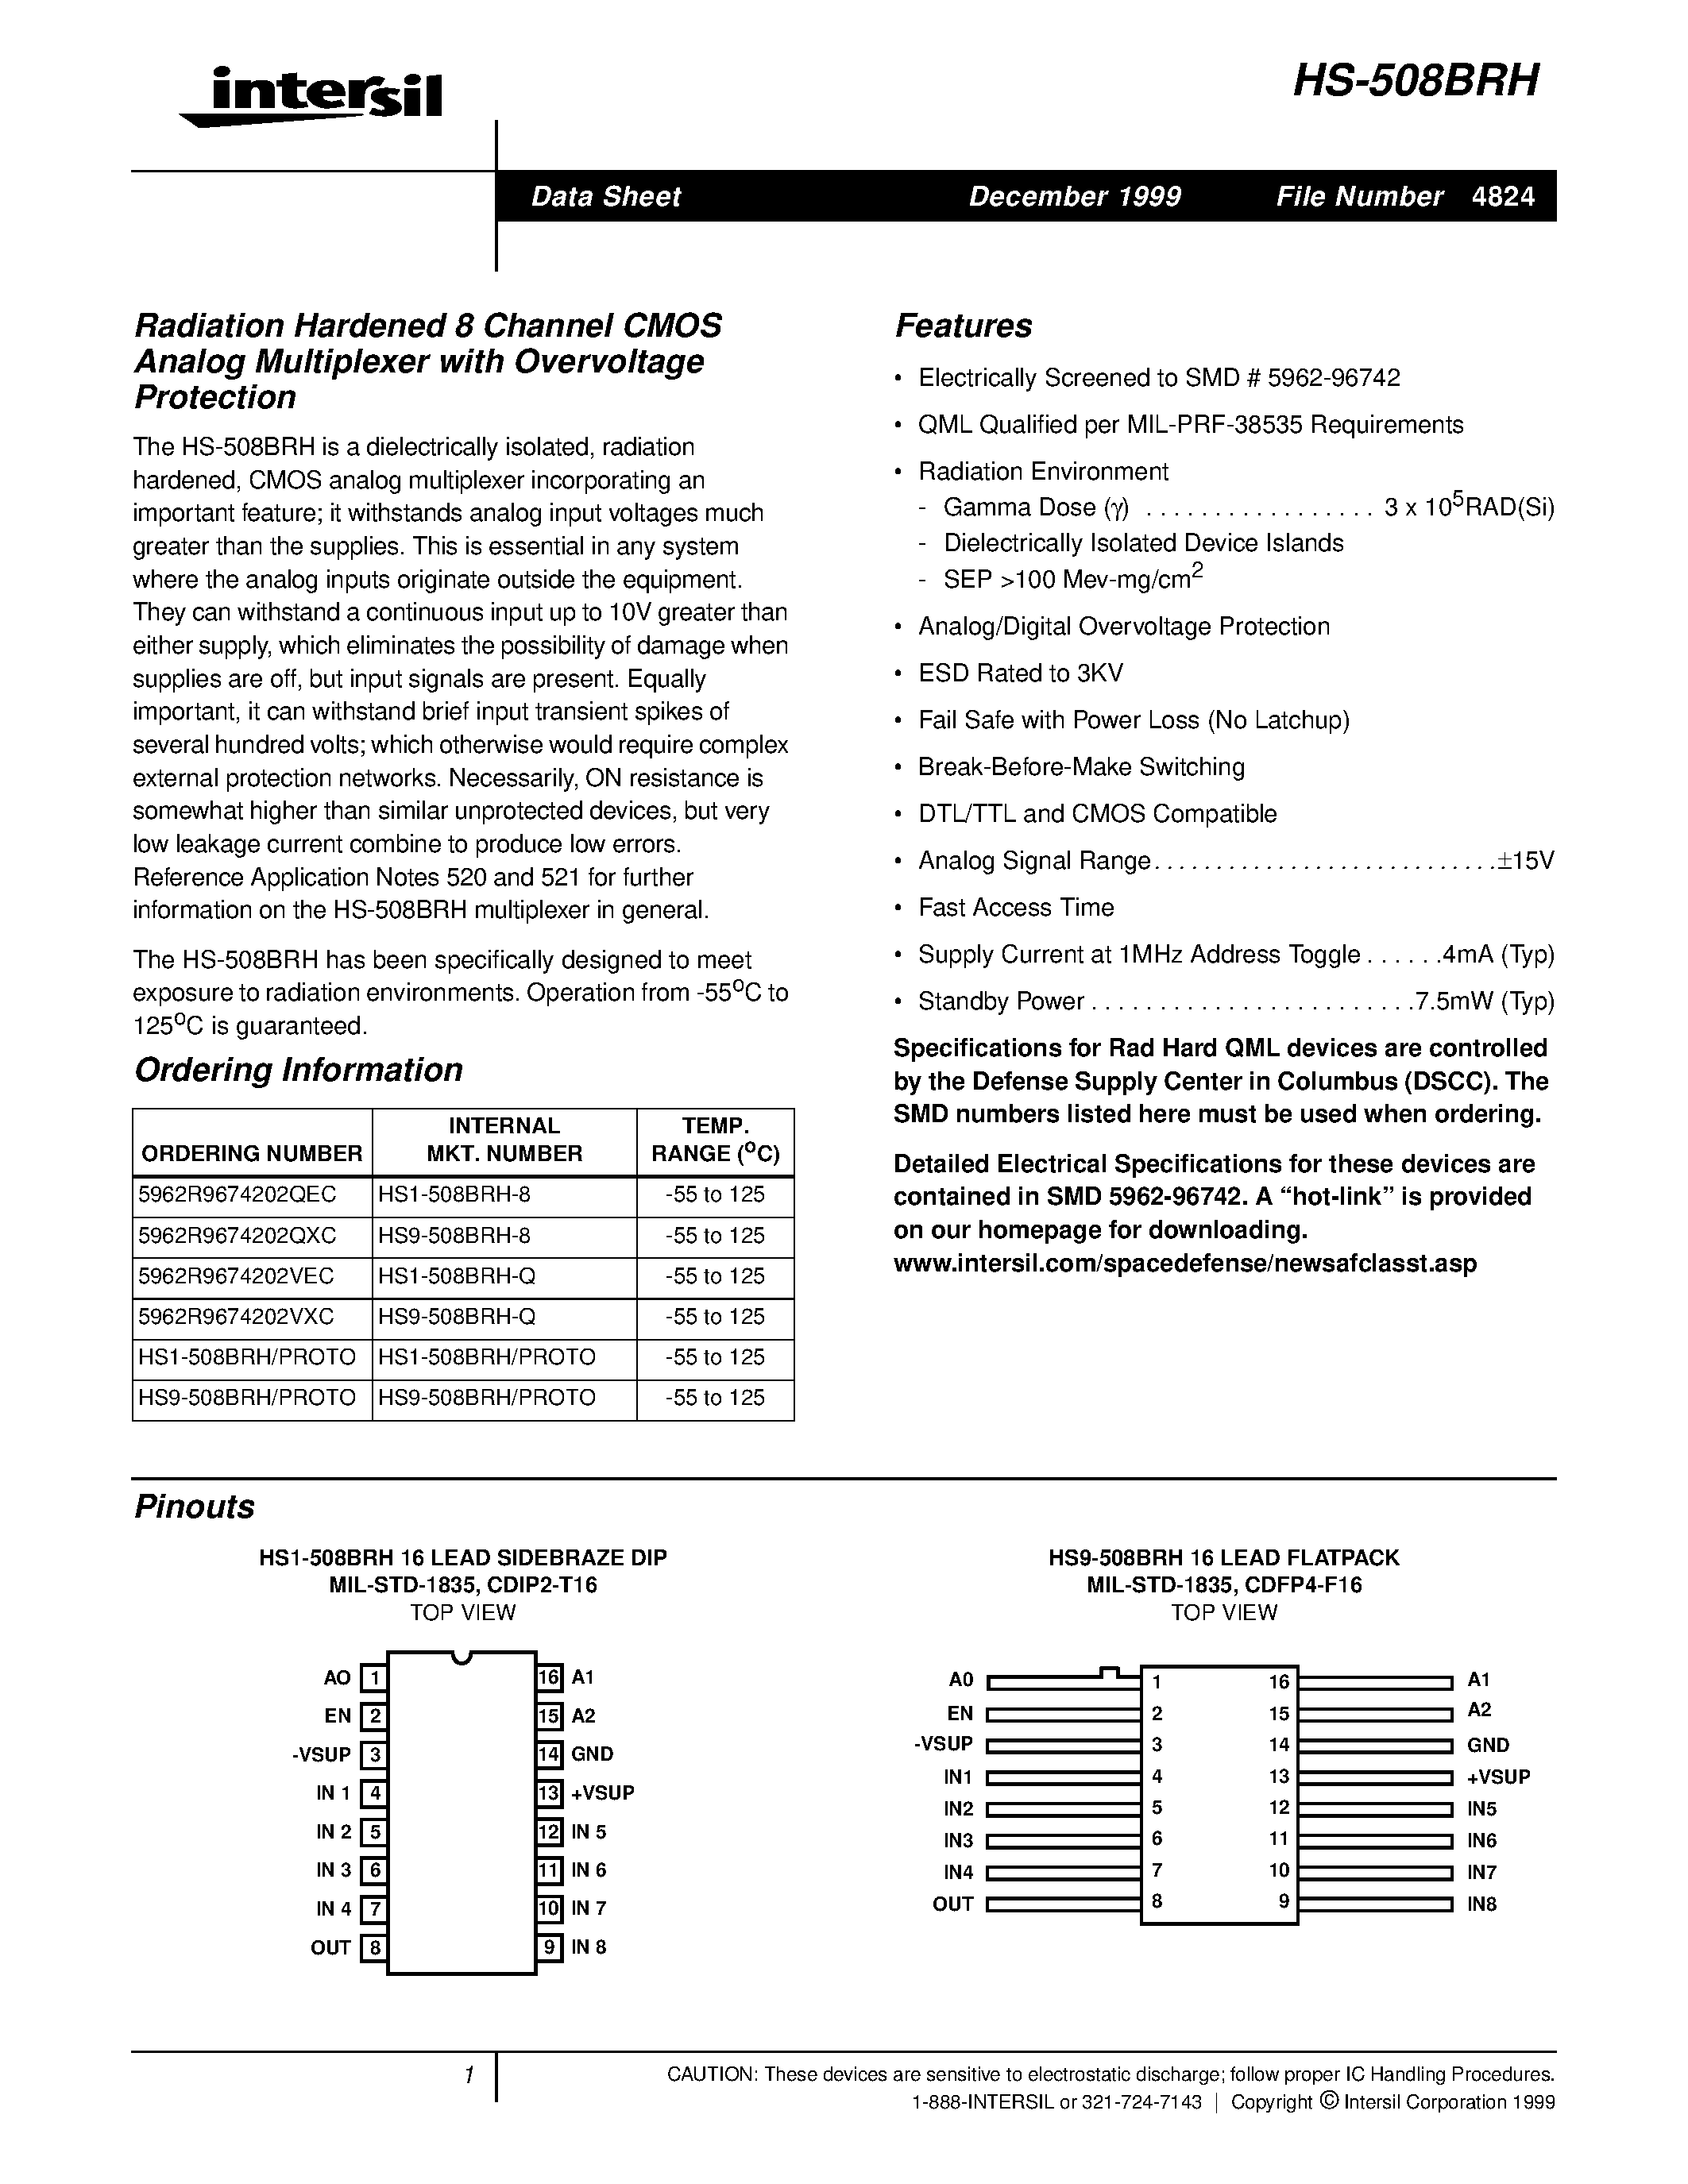 Datasheet HS1-508BRH-8 - Radiation Hardened 8 Channel CMOS Analog Multiplexer with Overvoltage Protection page 1